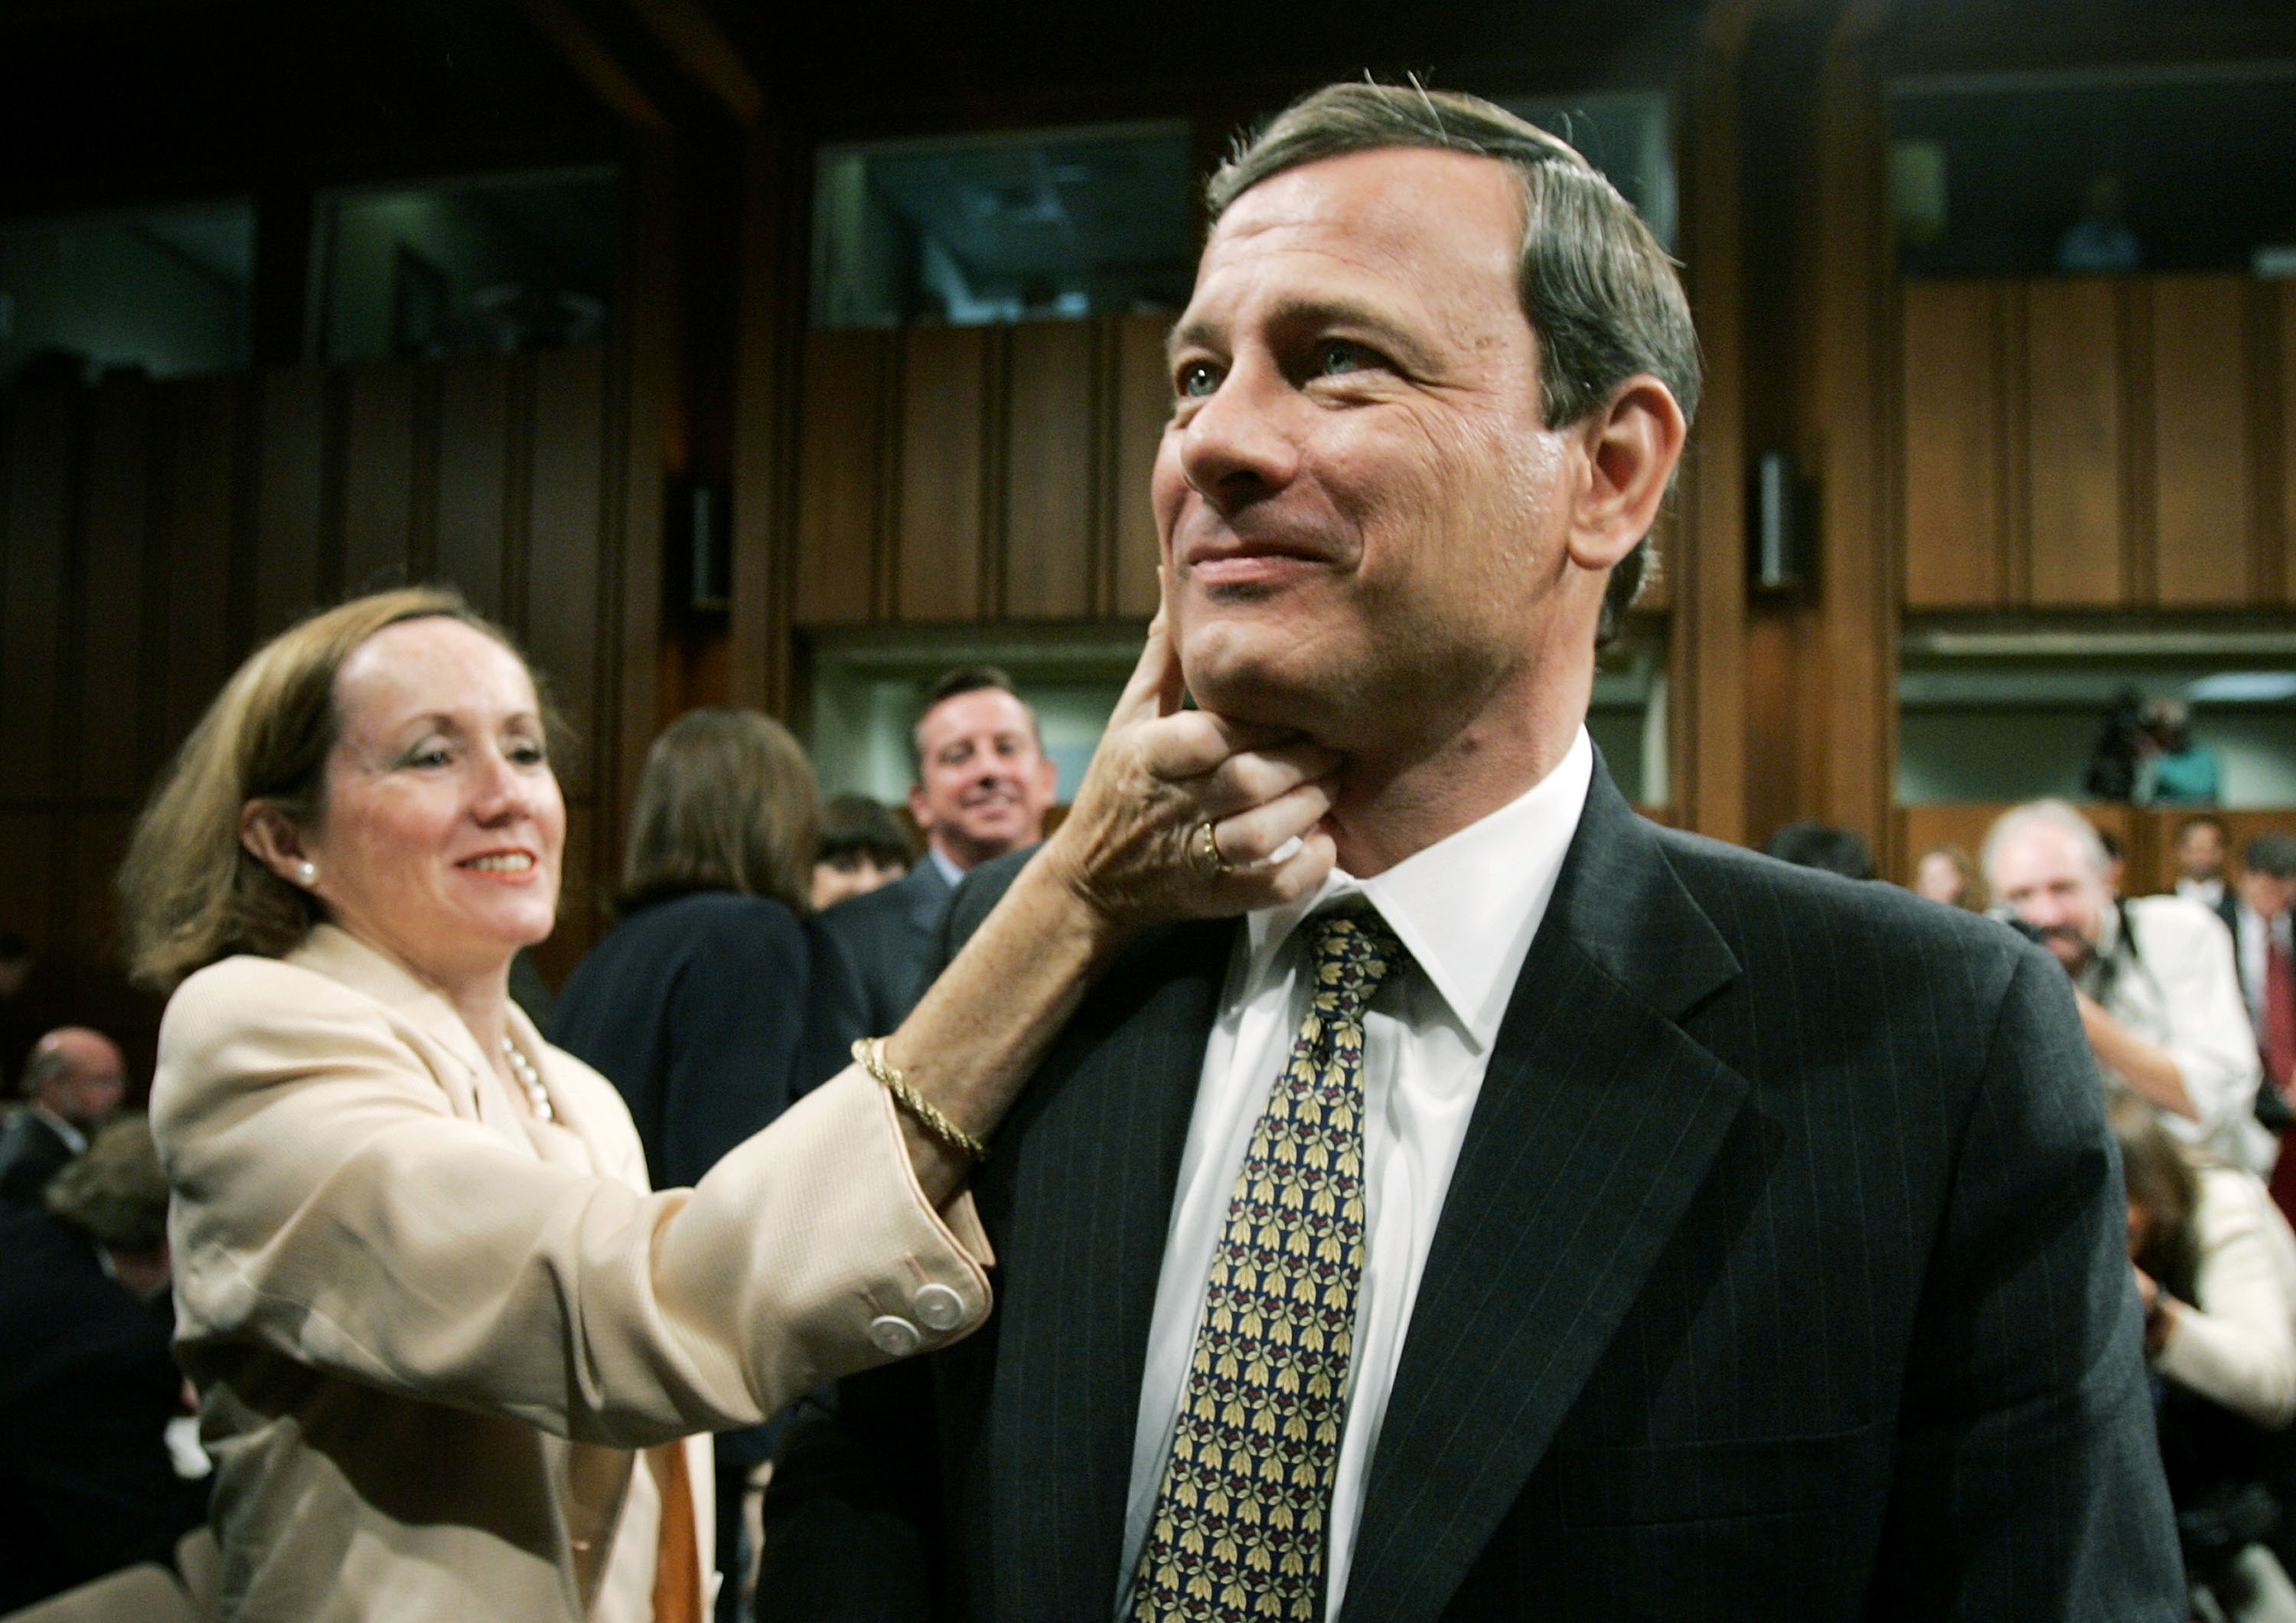 Fix the Court Statement Ahead of Chief Justice Roberts' Year-End